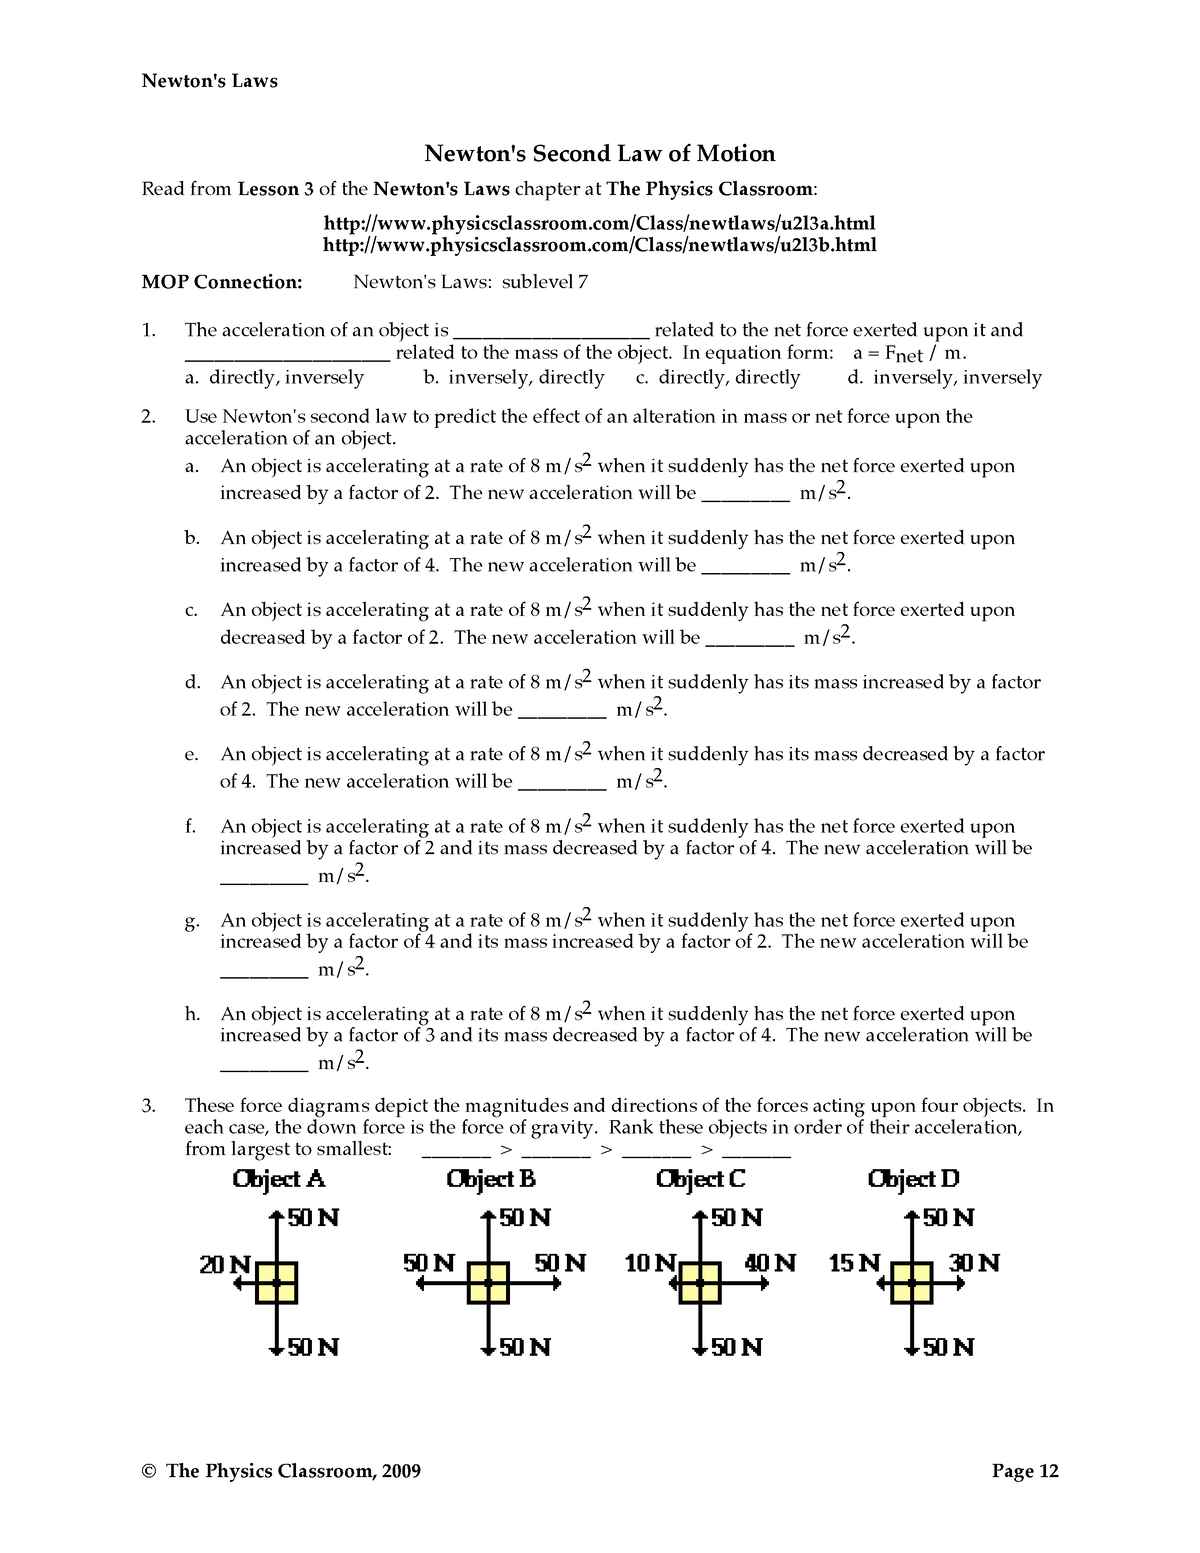 newton-s-second-law-of-motion-practice-worksheet-newton-s-laws-the-physics-classroom-2009-page